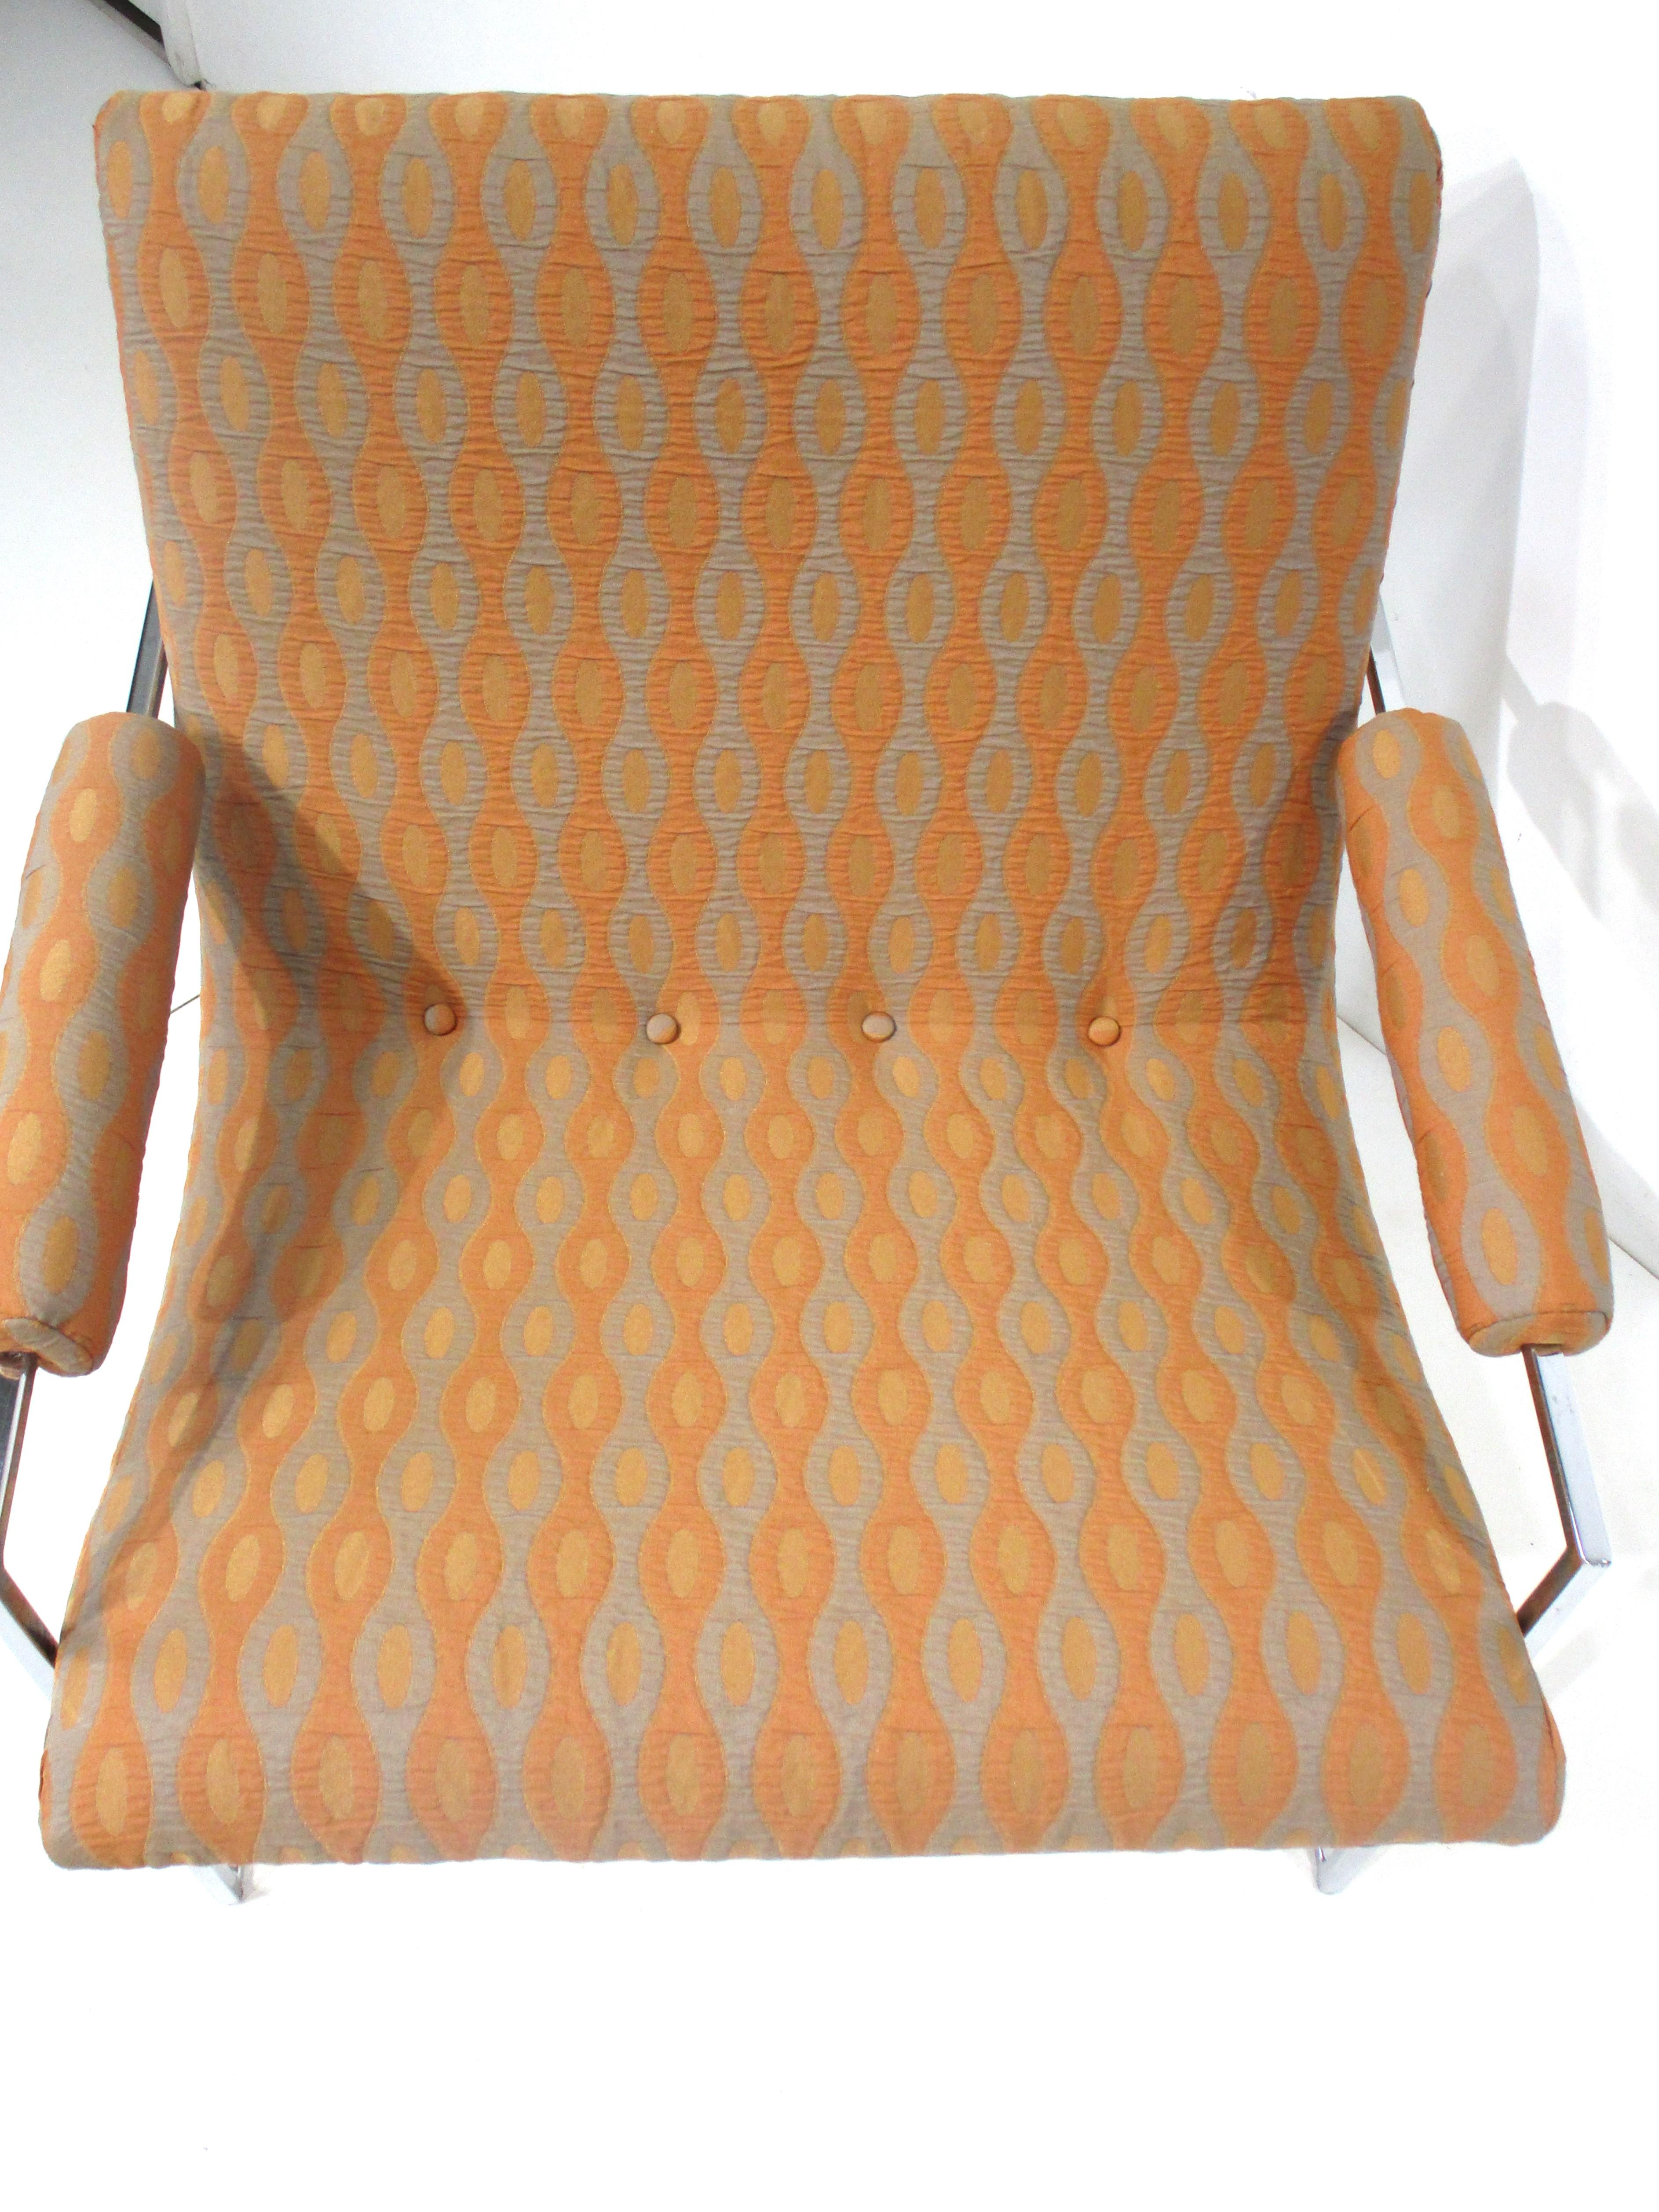 20th Century Mid Century Milo Baughman Scoop Lounge Chair for Thayer Coggin  For Sale